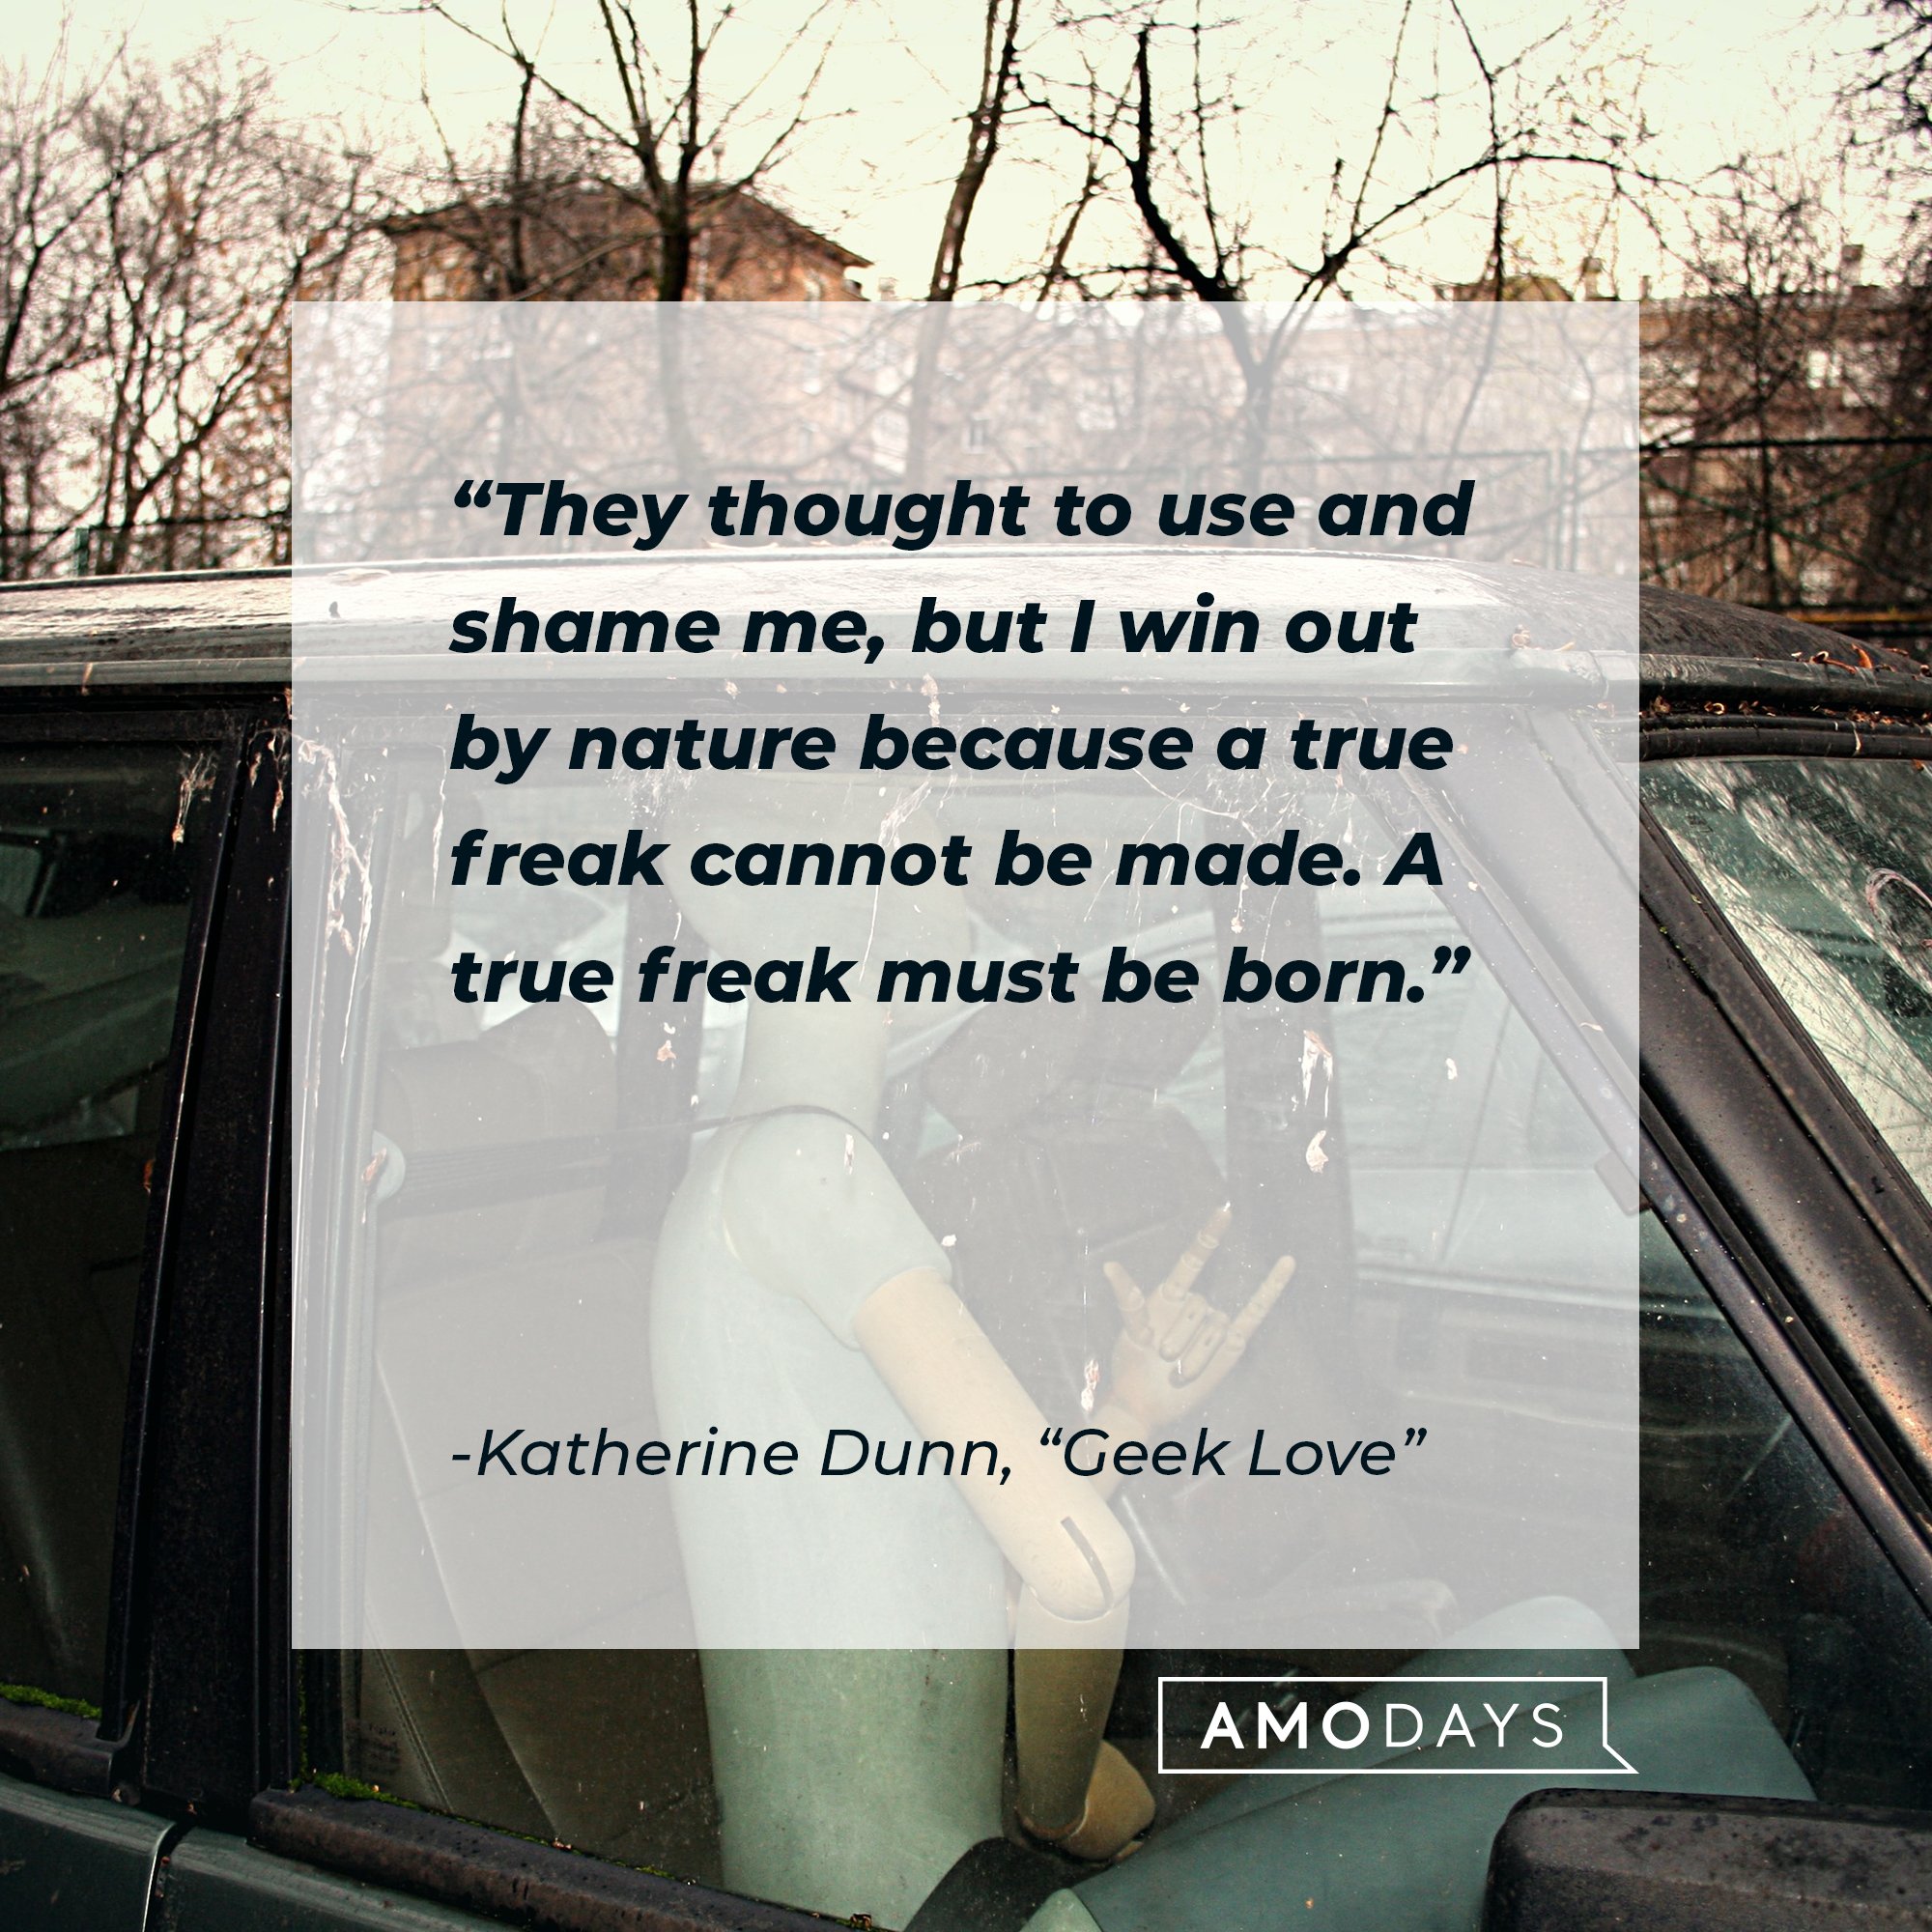 Katherine Dunn’s quote from "Geek Love": "They thought to use and shame me, but I win out by nature because a true freak cannot be made. A true freak must be born.” | Image: AmoDays